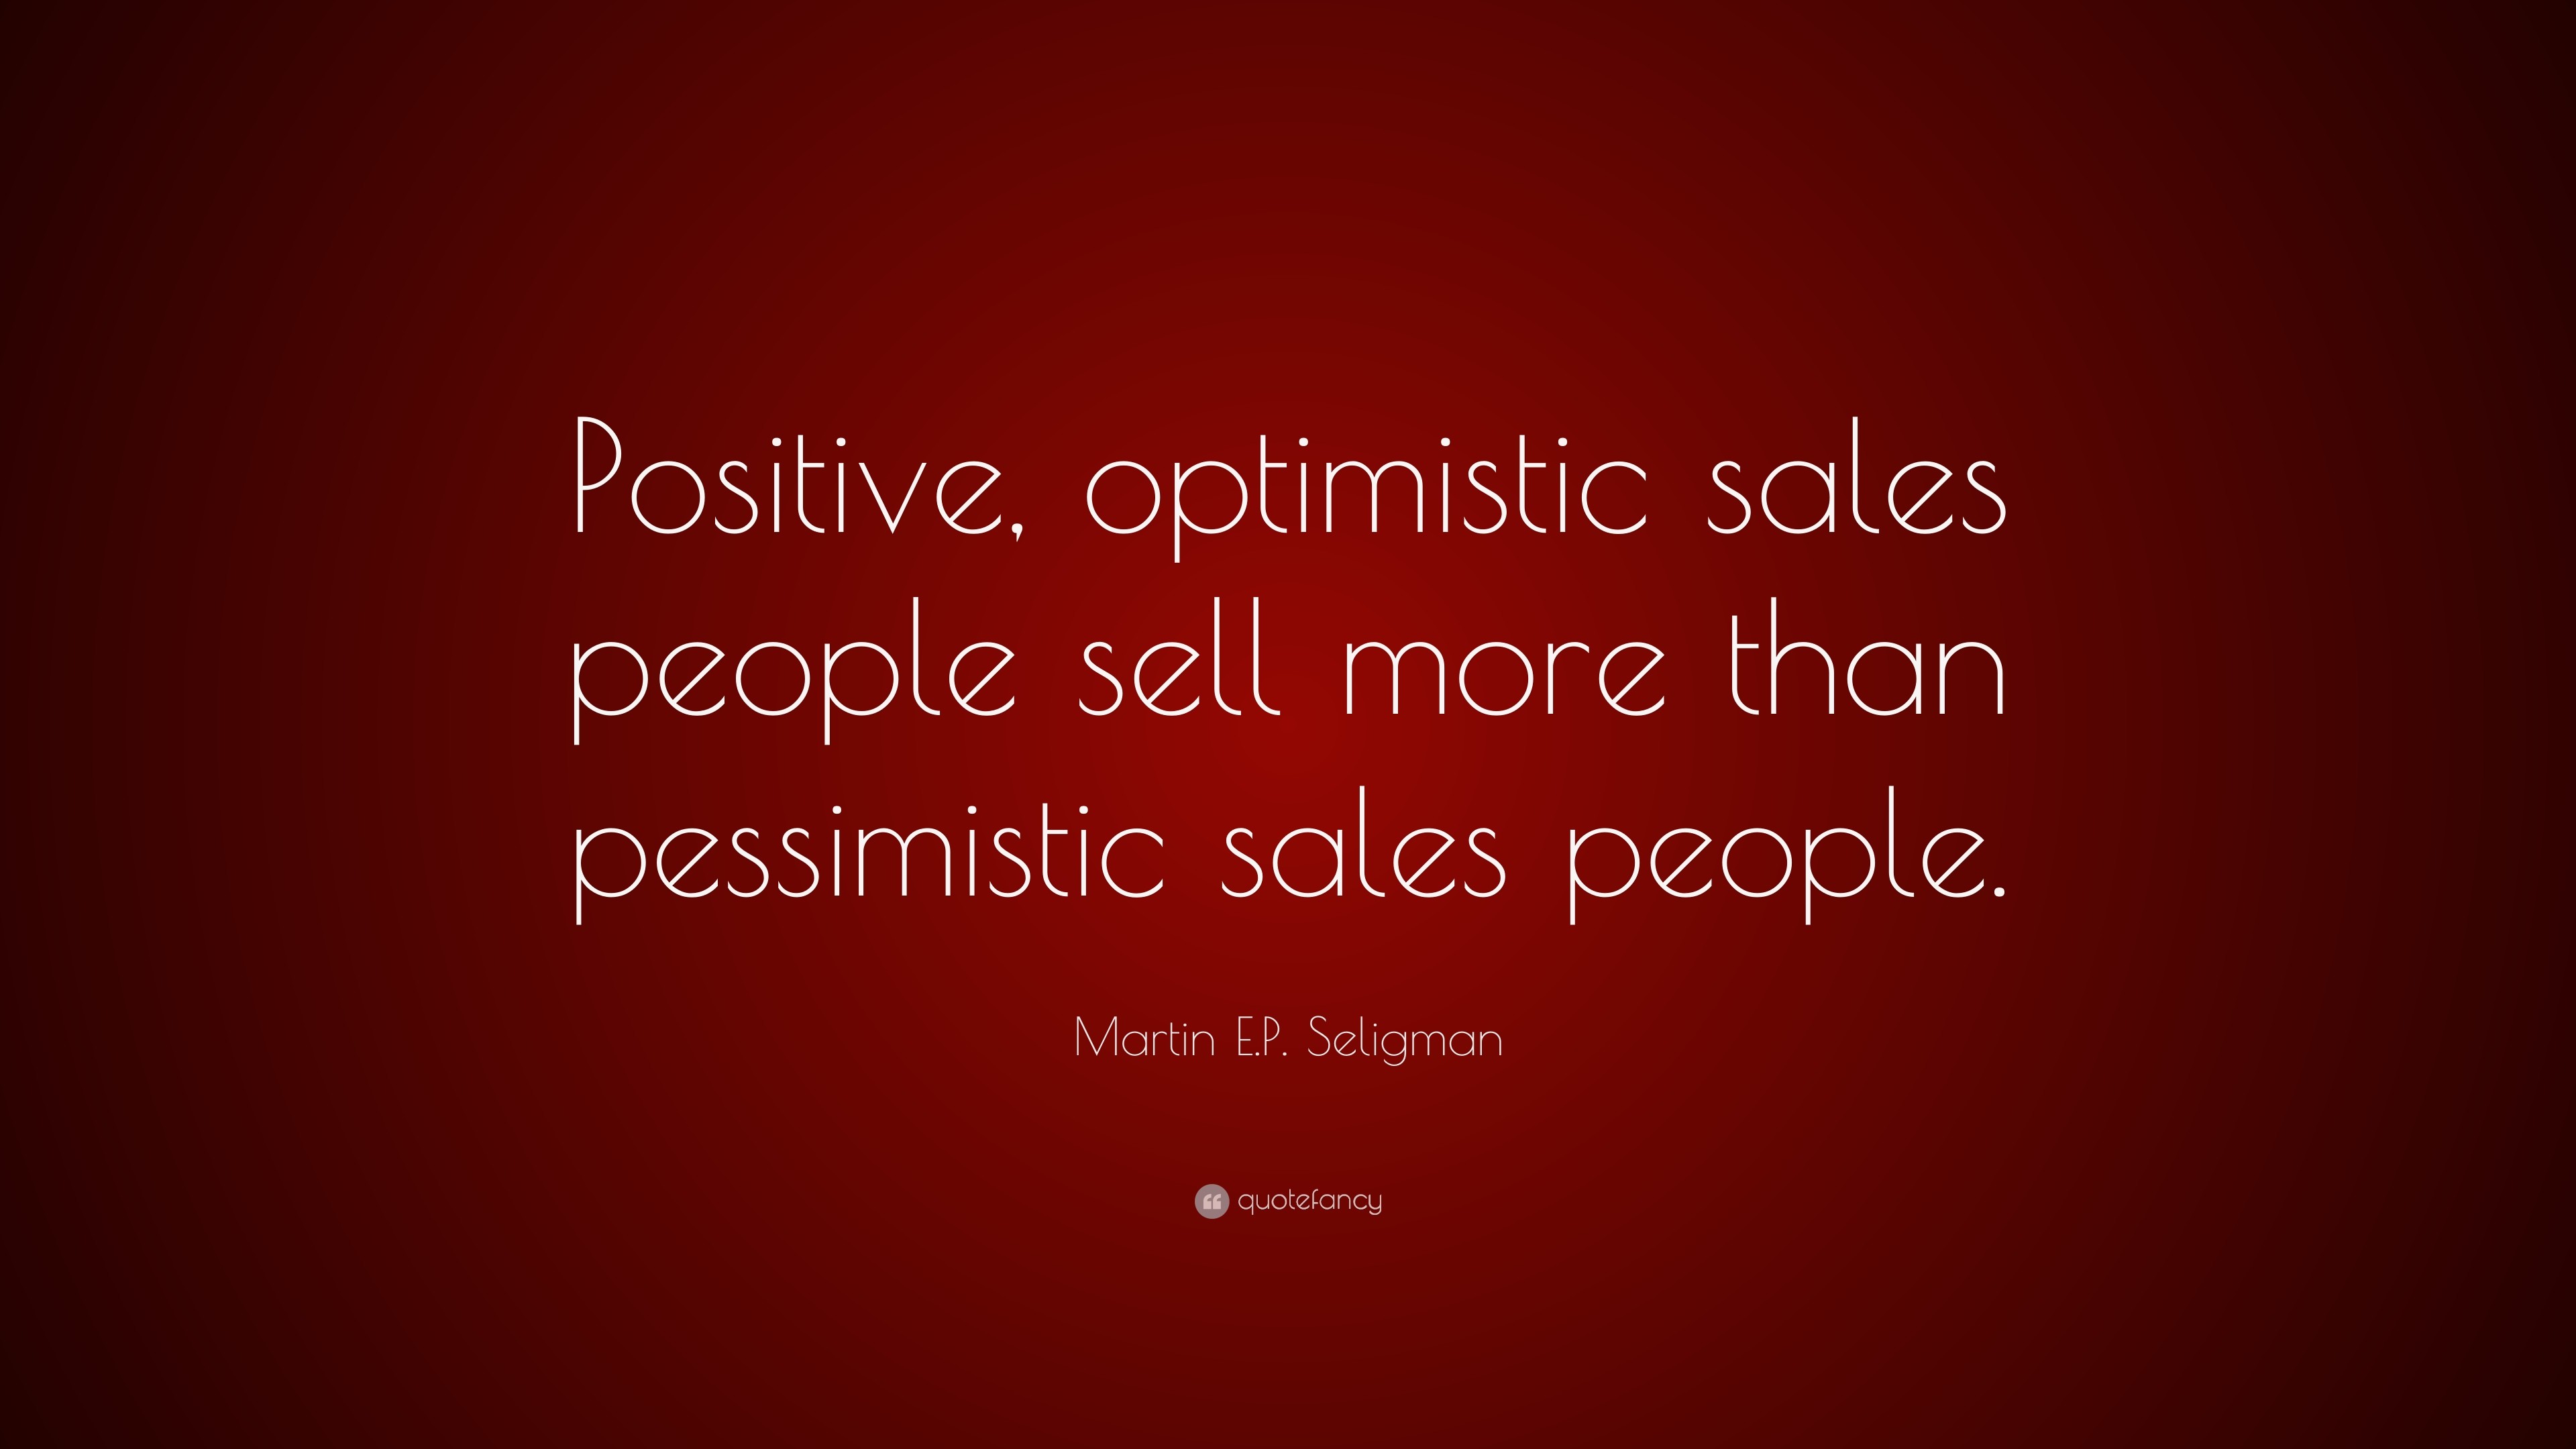 3840x2160 Martin E.P. Seligman Quote: “Positive, optimistic sales people sell more  than pessimistic sales